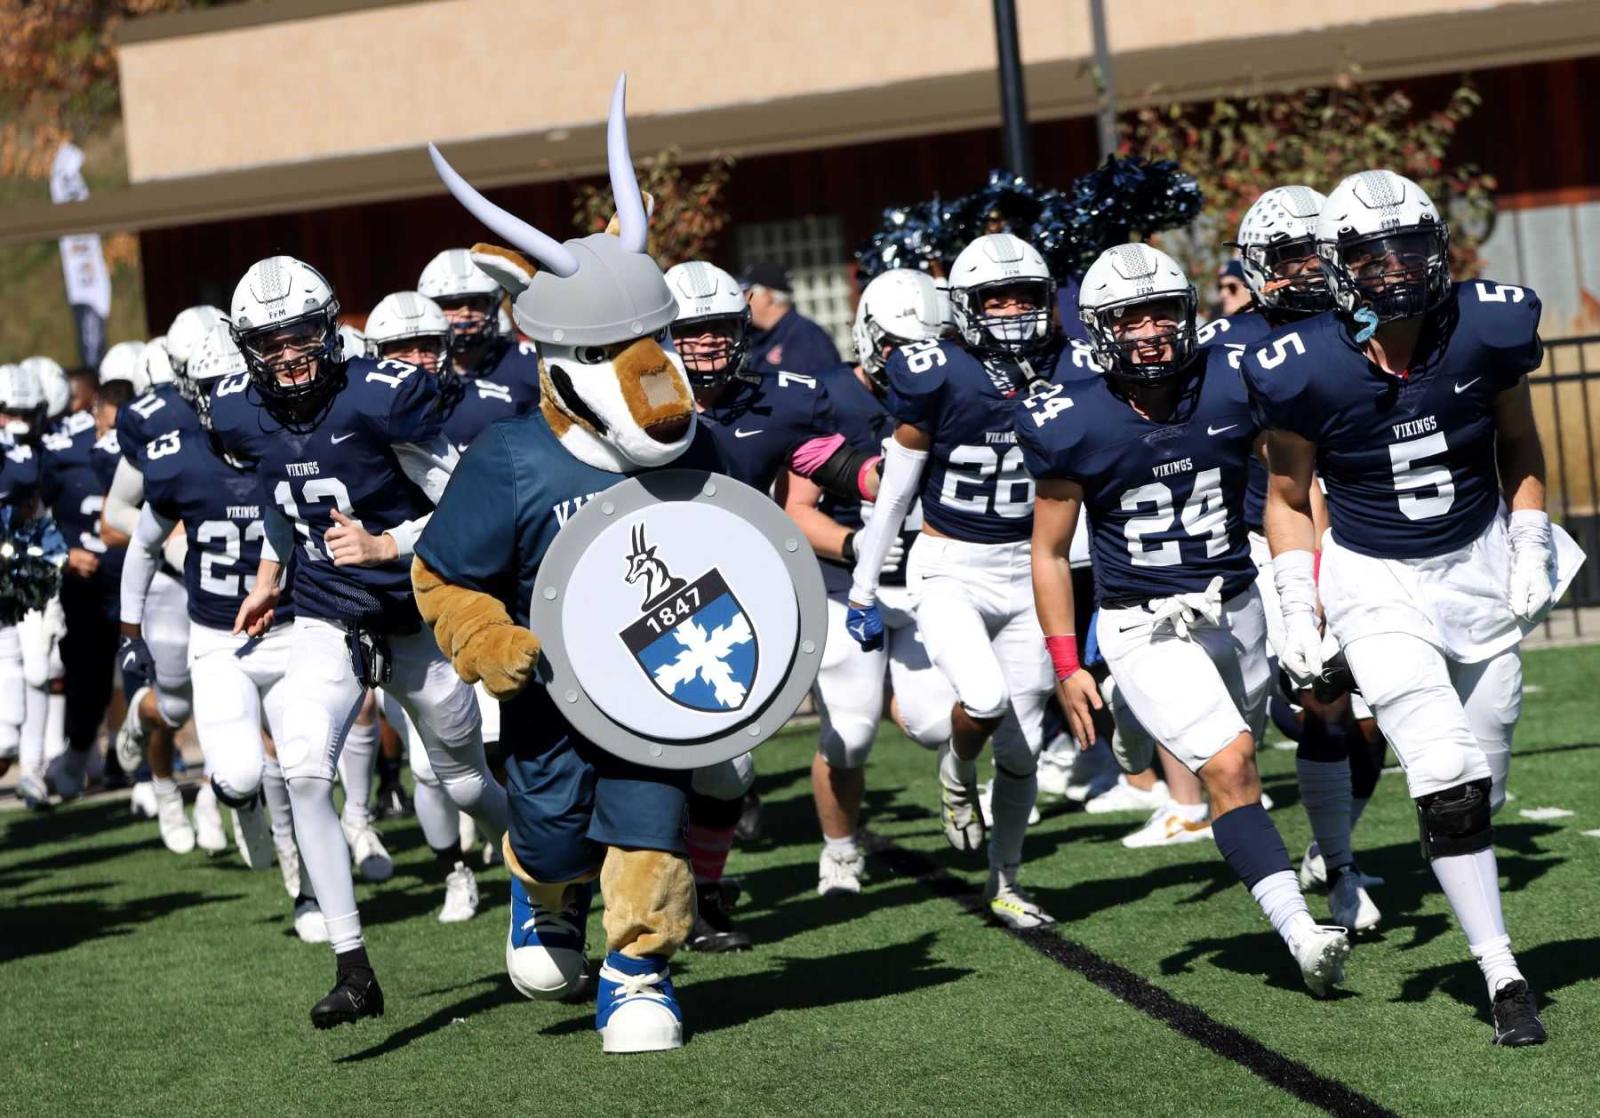 The antelope mascot dressed in Viking gear and carrying a shield with the Lawrence crest leads the football team onto the field before the game.